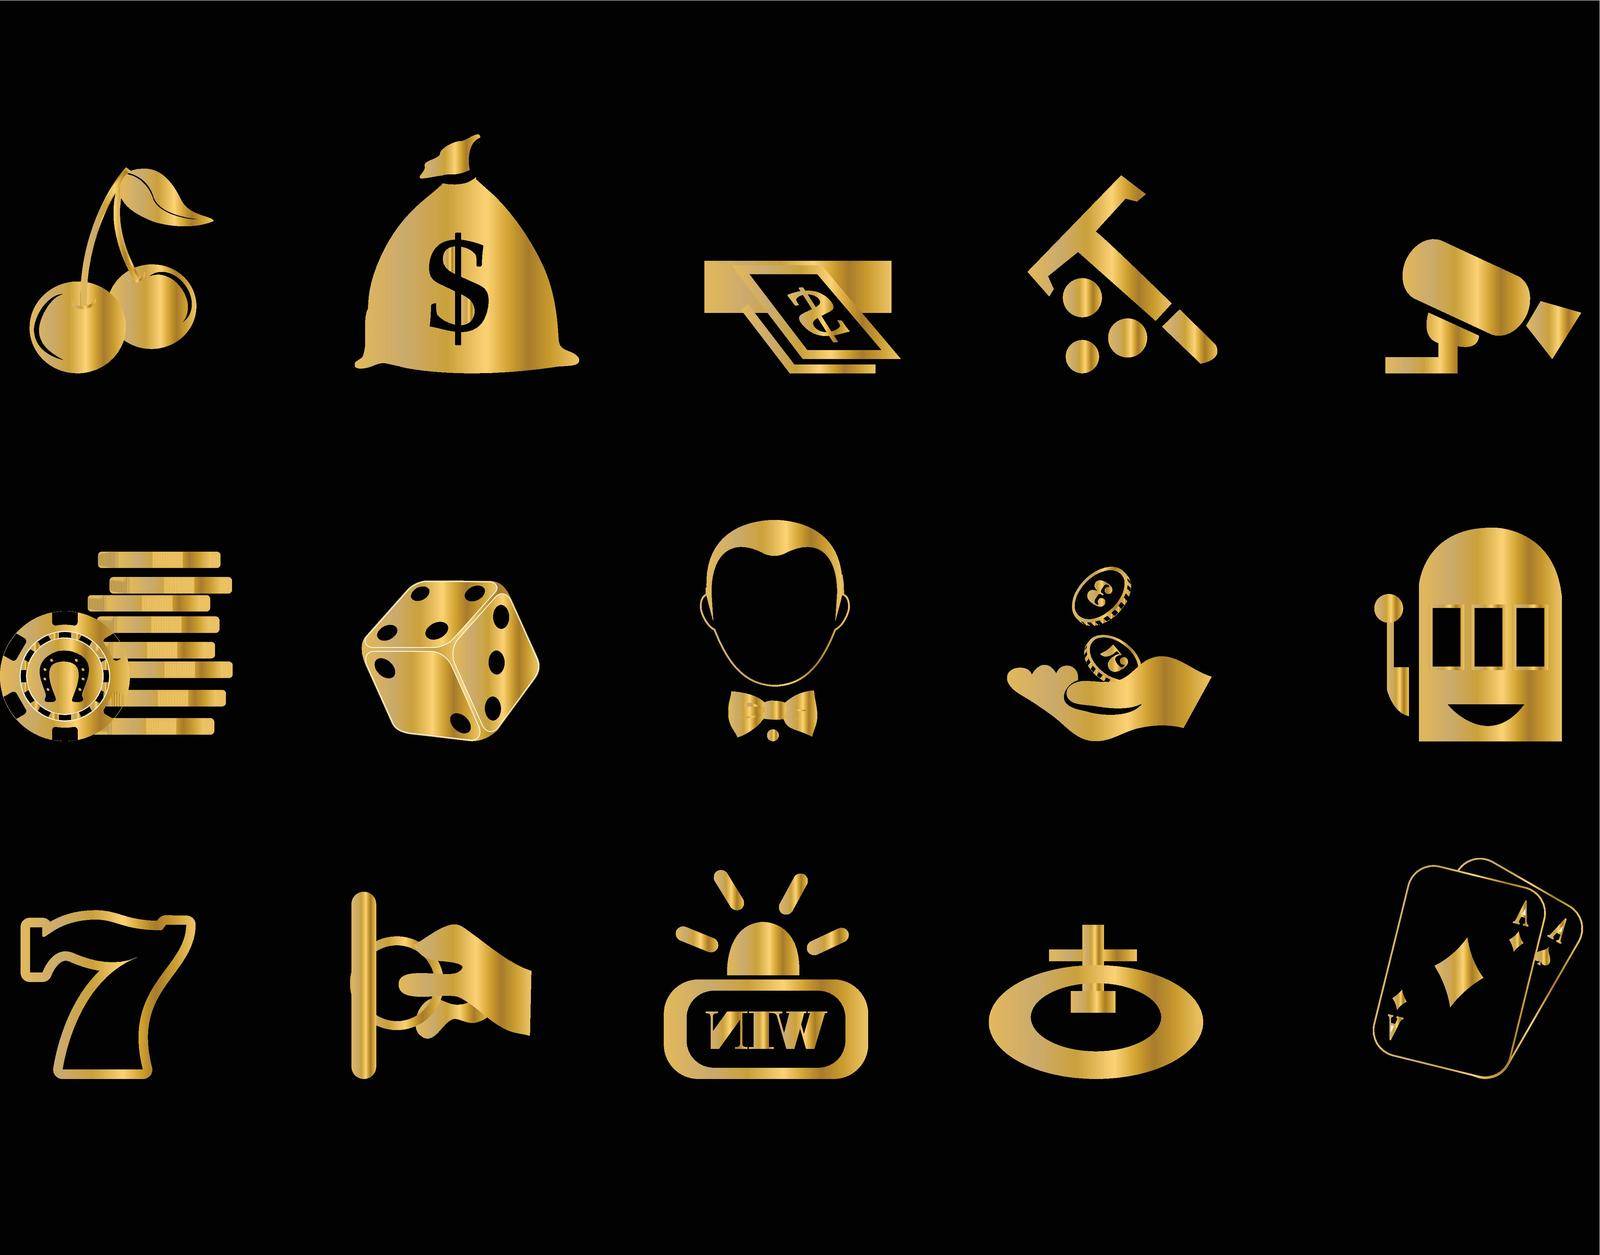 you can use Golden casino icons, poker game symbols to design banners, posters, backgrounds, ...etc.